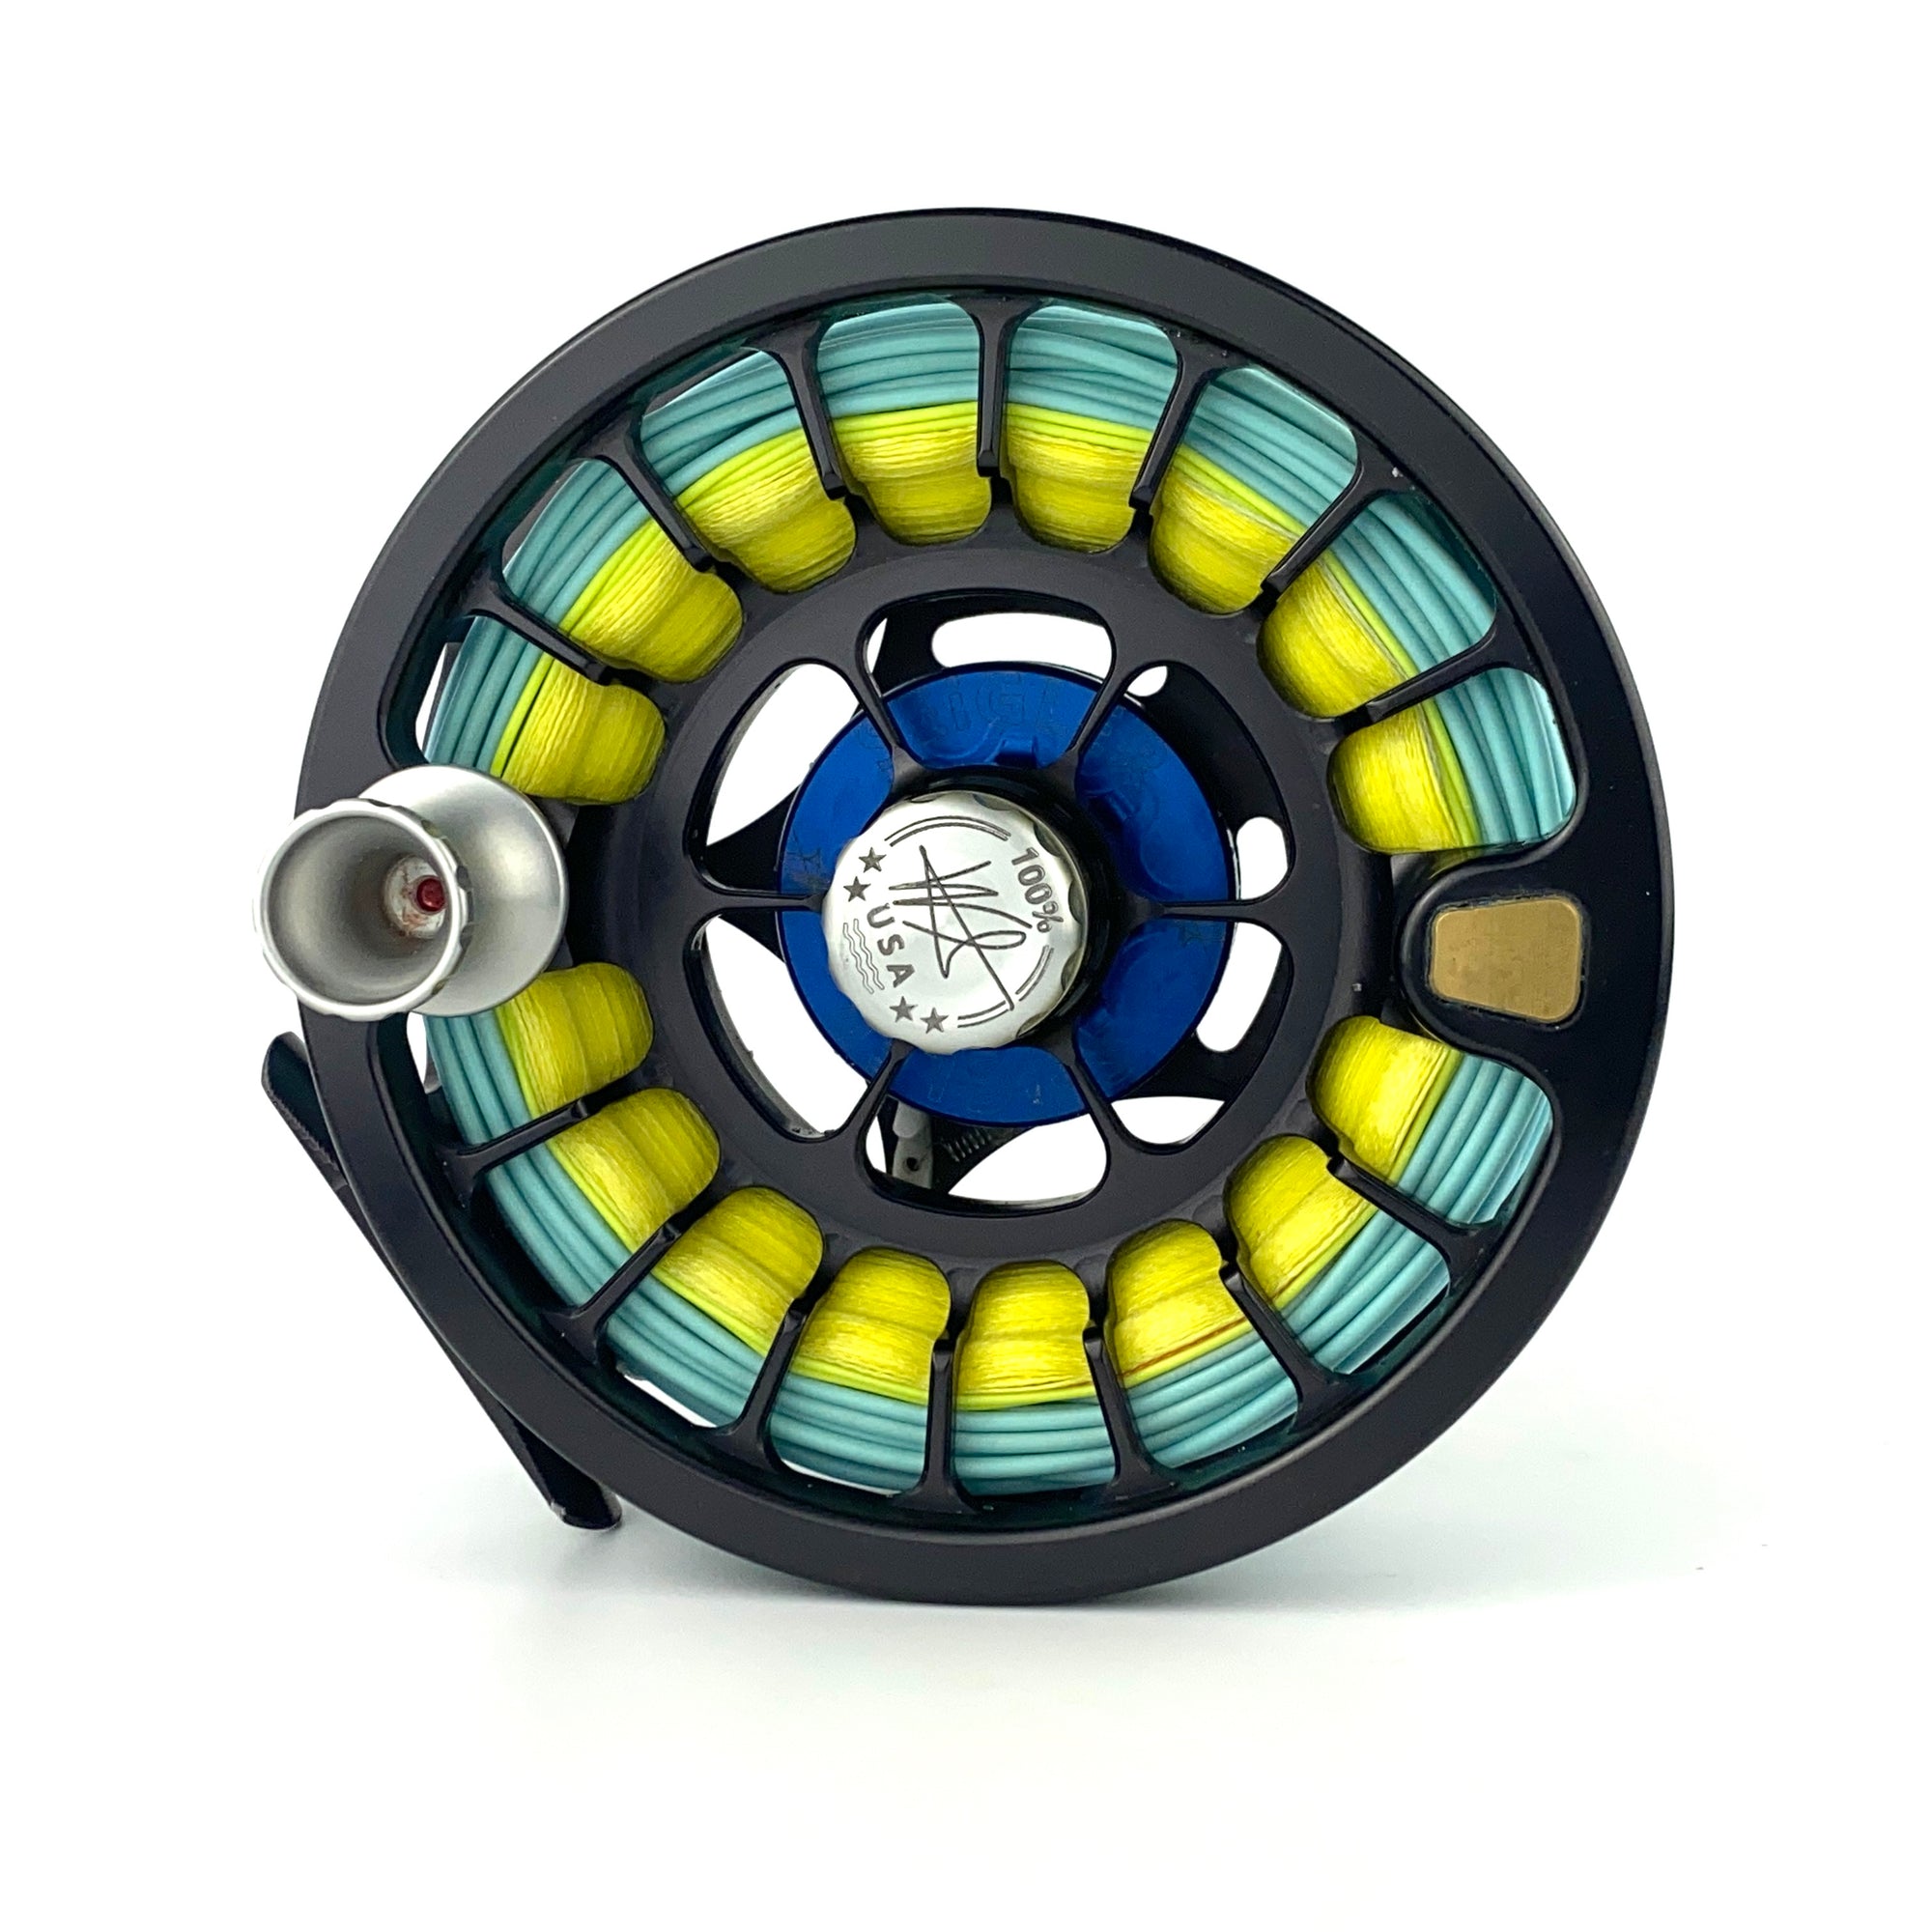 The Ultimate 12-Weight, 5-Inch Diameter Tarpon Fly Reel: Expertly Designed in Collaboration with Dustin Huff for Top-Tier Fishing Performance.